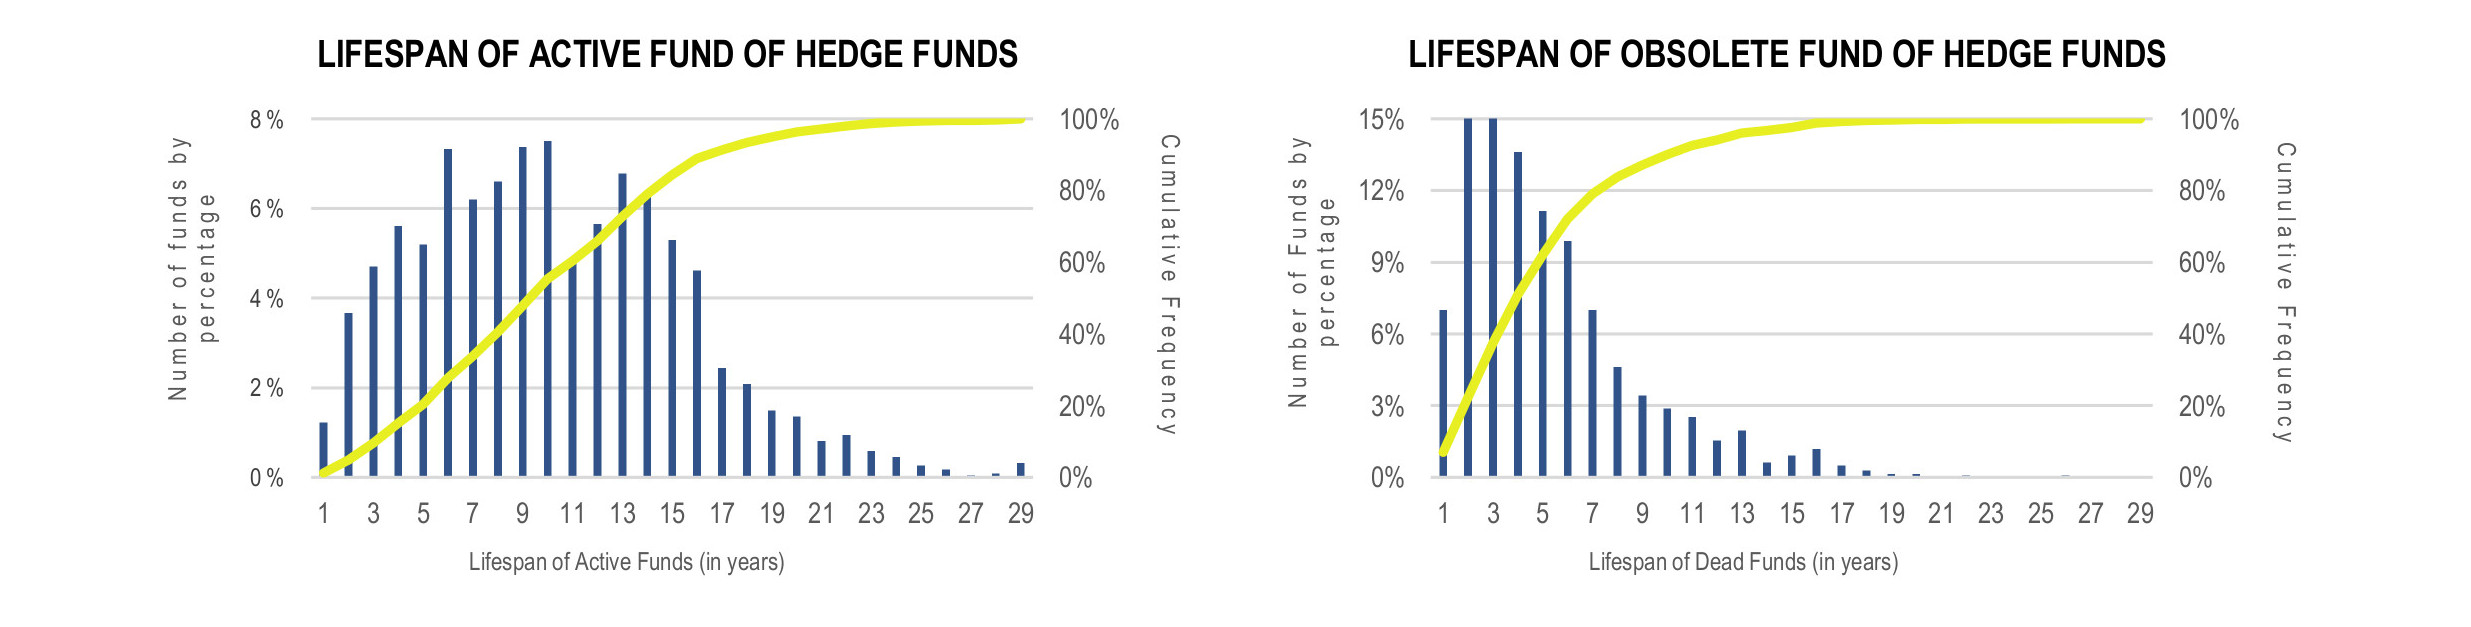 Funds of Hedge Funds Infographic June 2019 - lifespan of active and obsolete fund of hedge funds